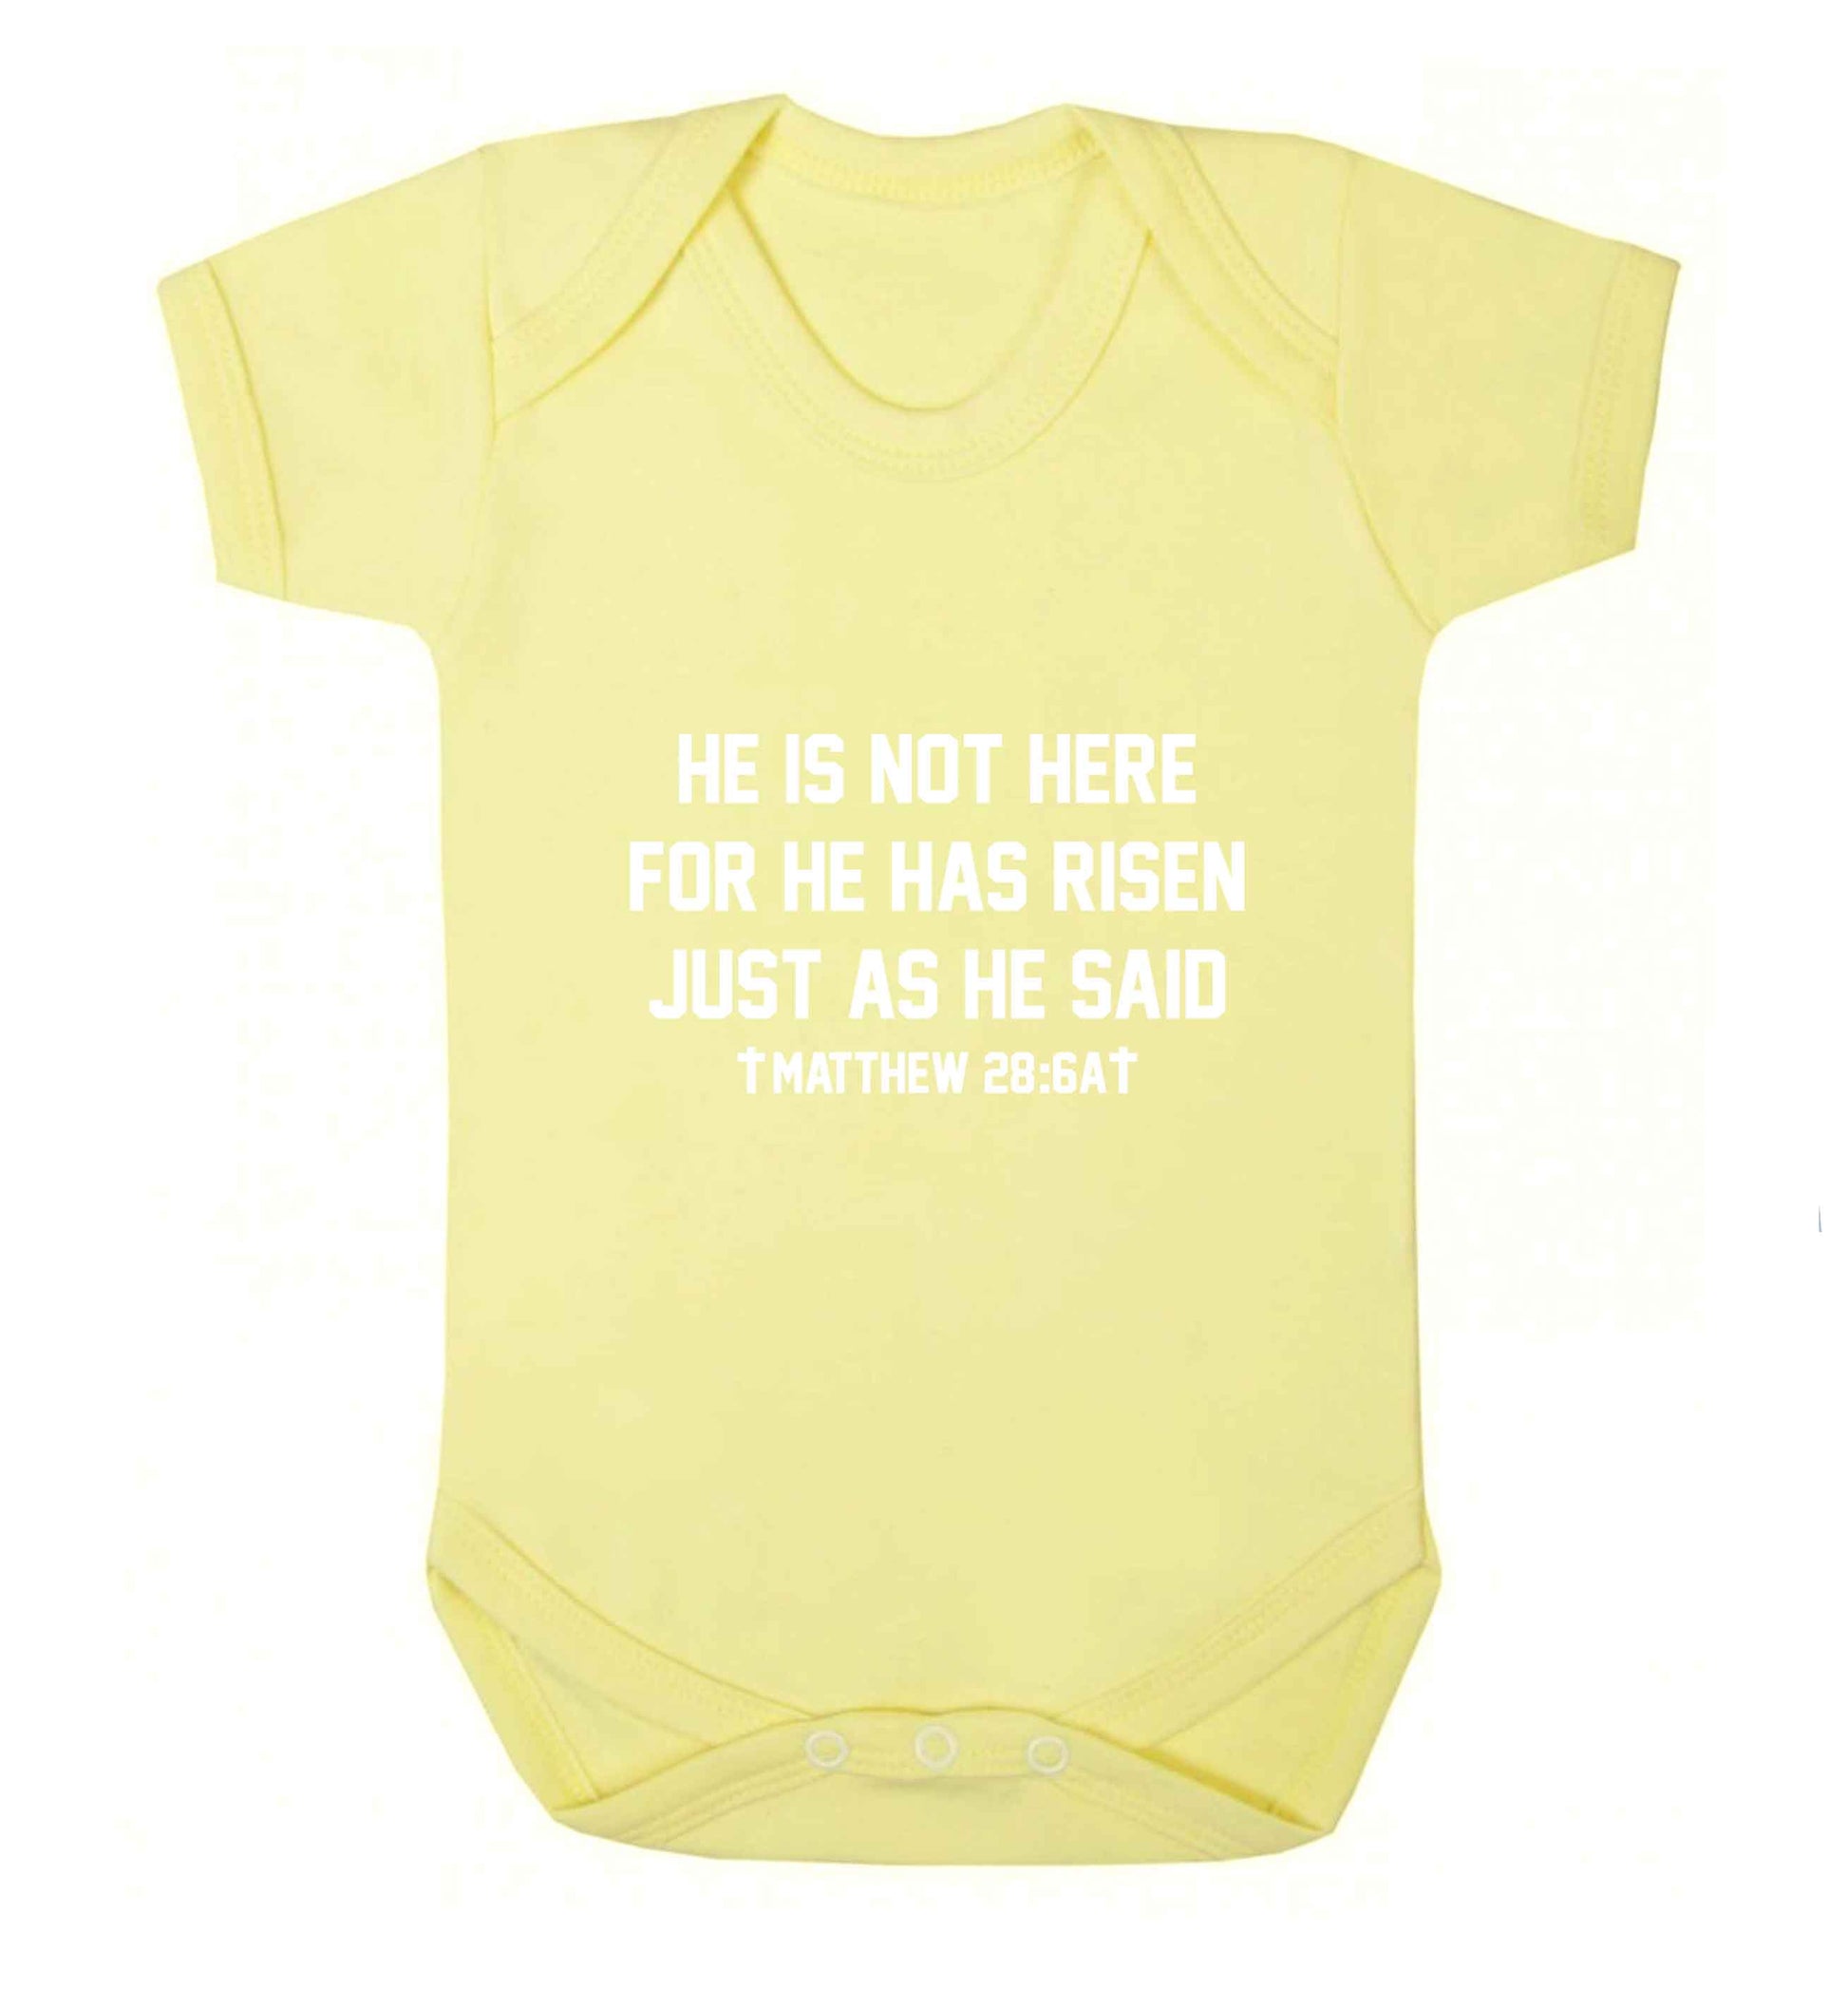 He is not here for he has risen just as he said matthew 28:6A baby vest pale yellow 18-24 months